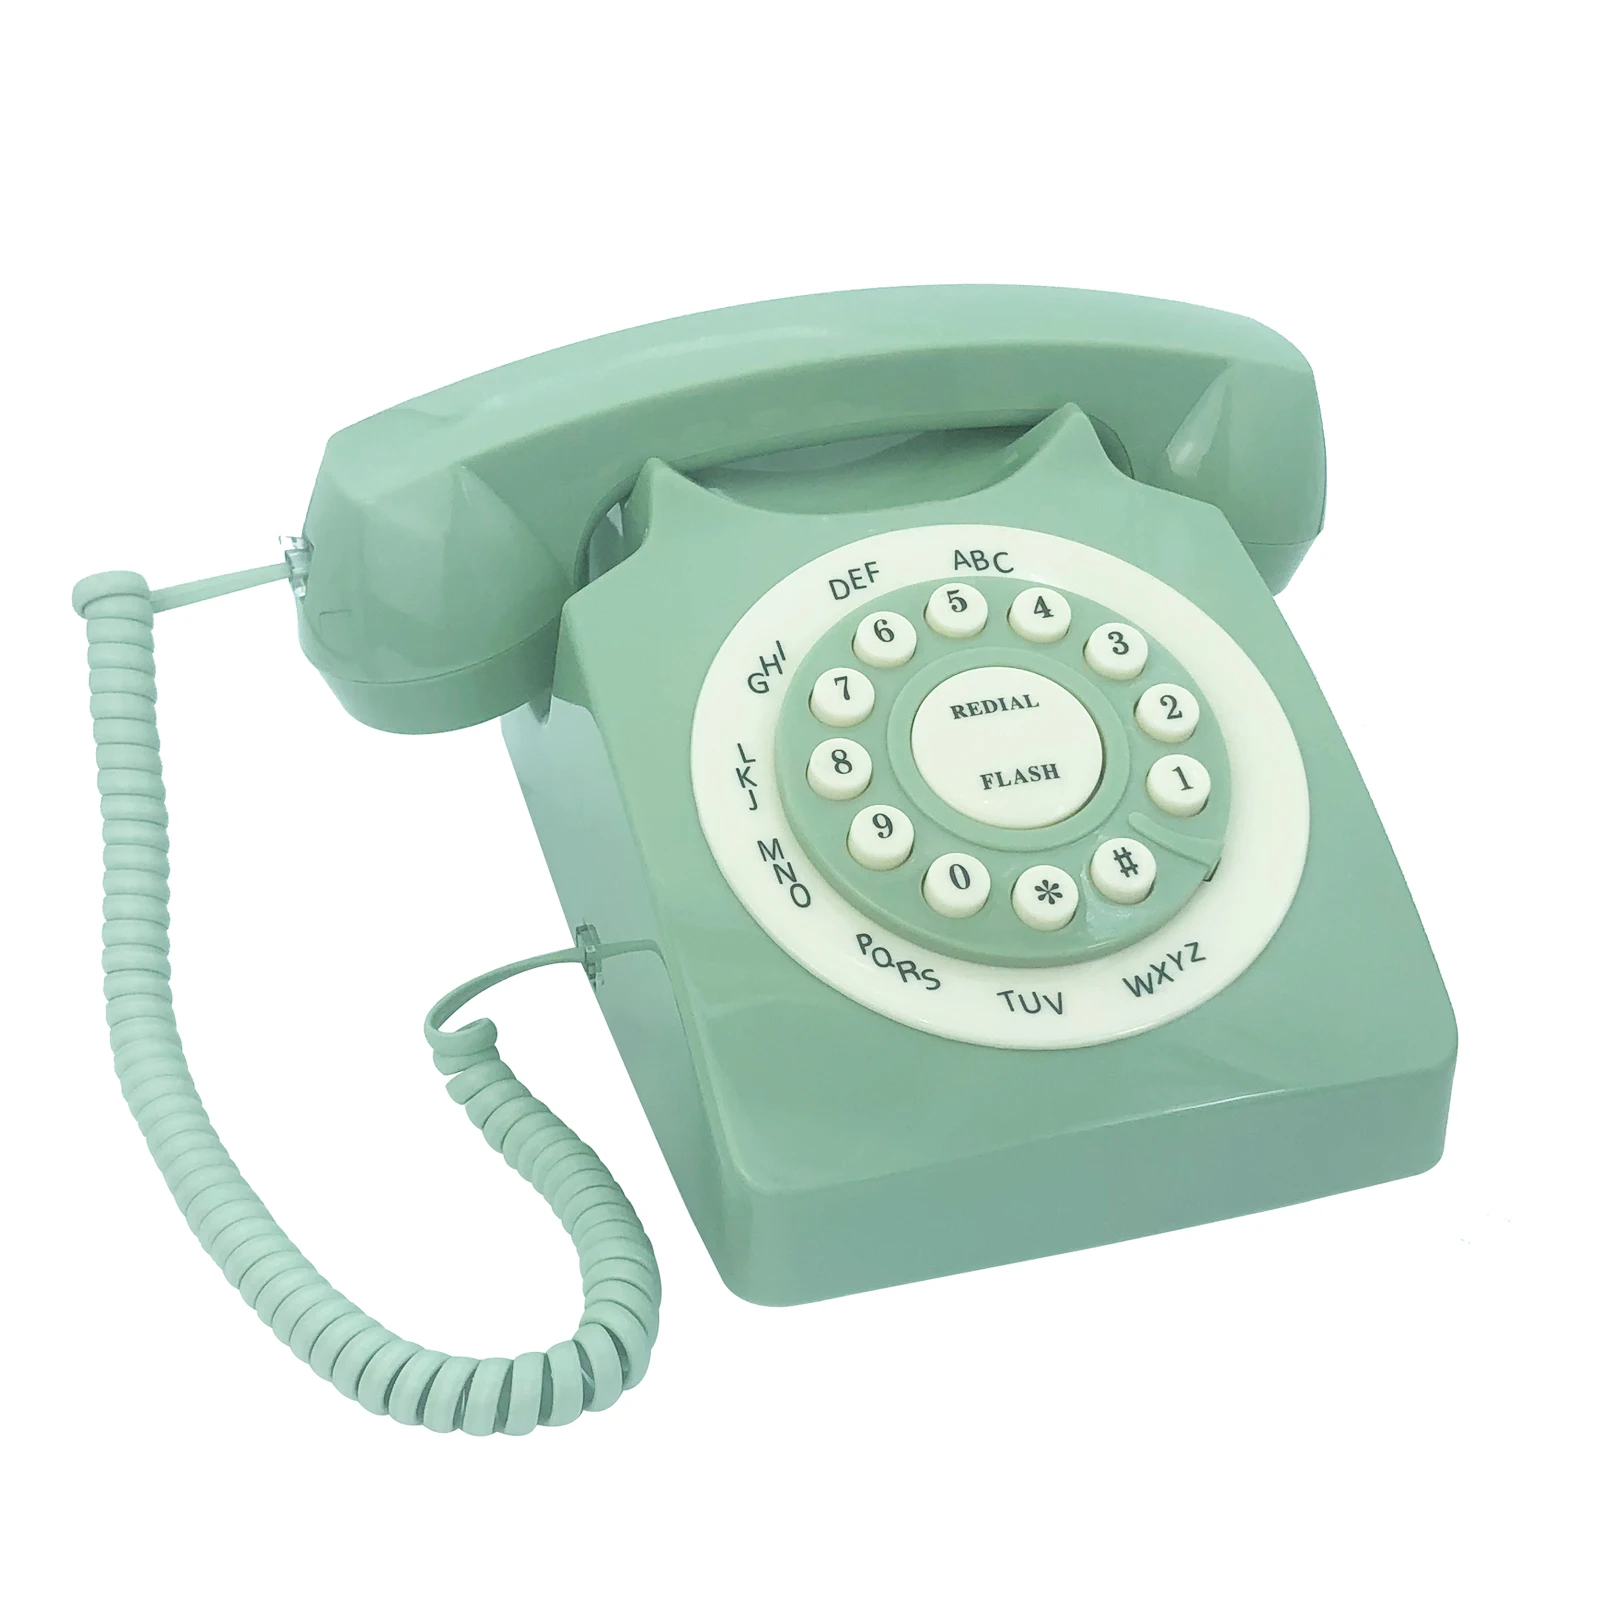 Corded Retro Phone, TelPal Vintage Old Phones, Classic 1930's Antique  Landline Phones for Home & Office Decor, Novelty Hotel Telephone with Redial